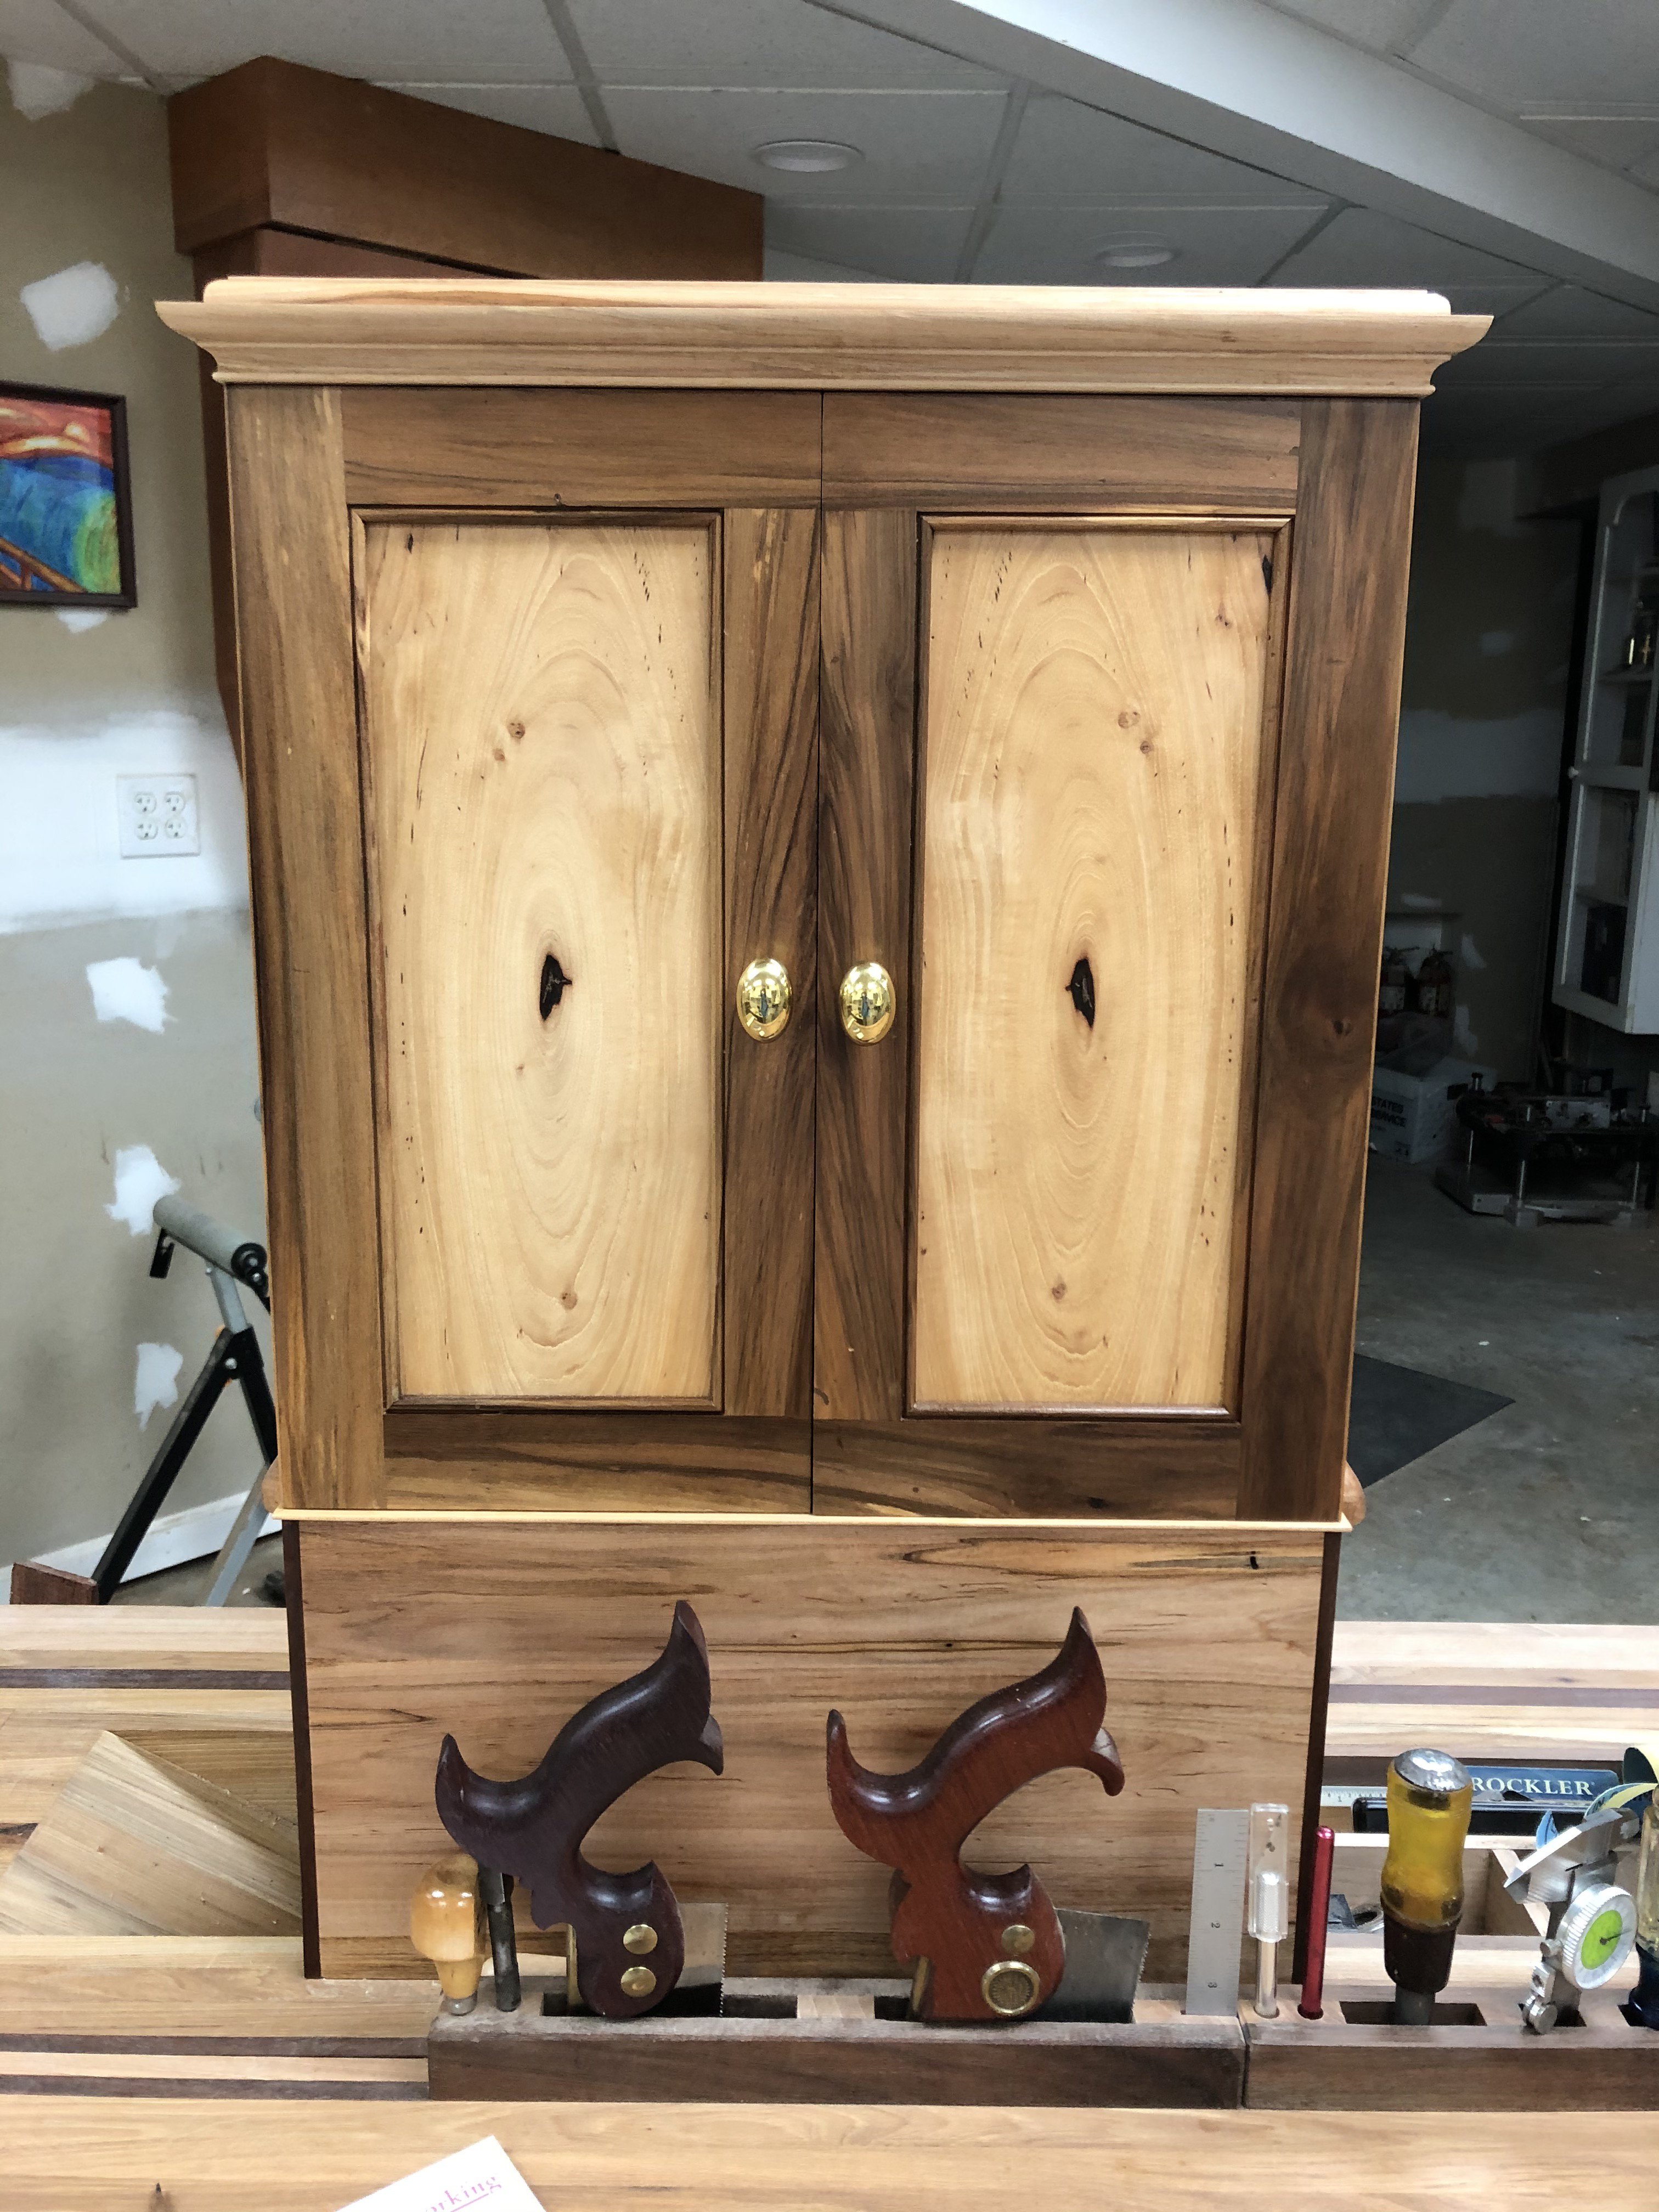 Bench top tool cabinet (closed)